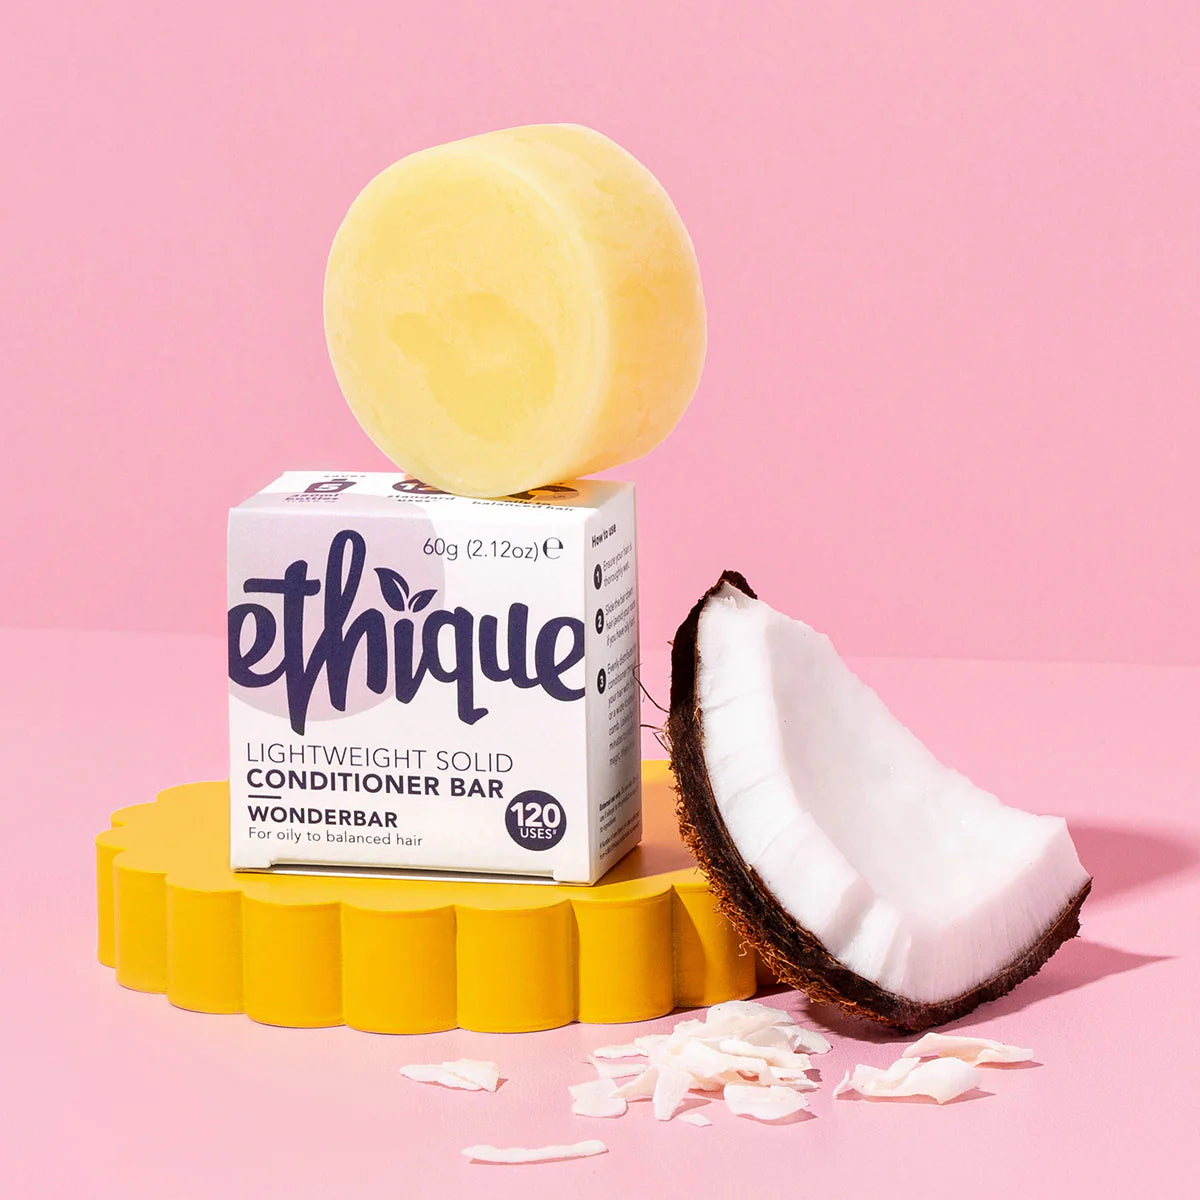 Ethique Solid Conditioner Wonderbar Bar for Balanced to oily hair (60g)-The Living Co.